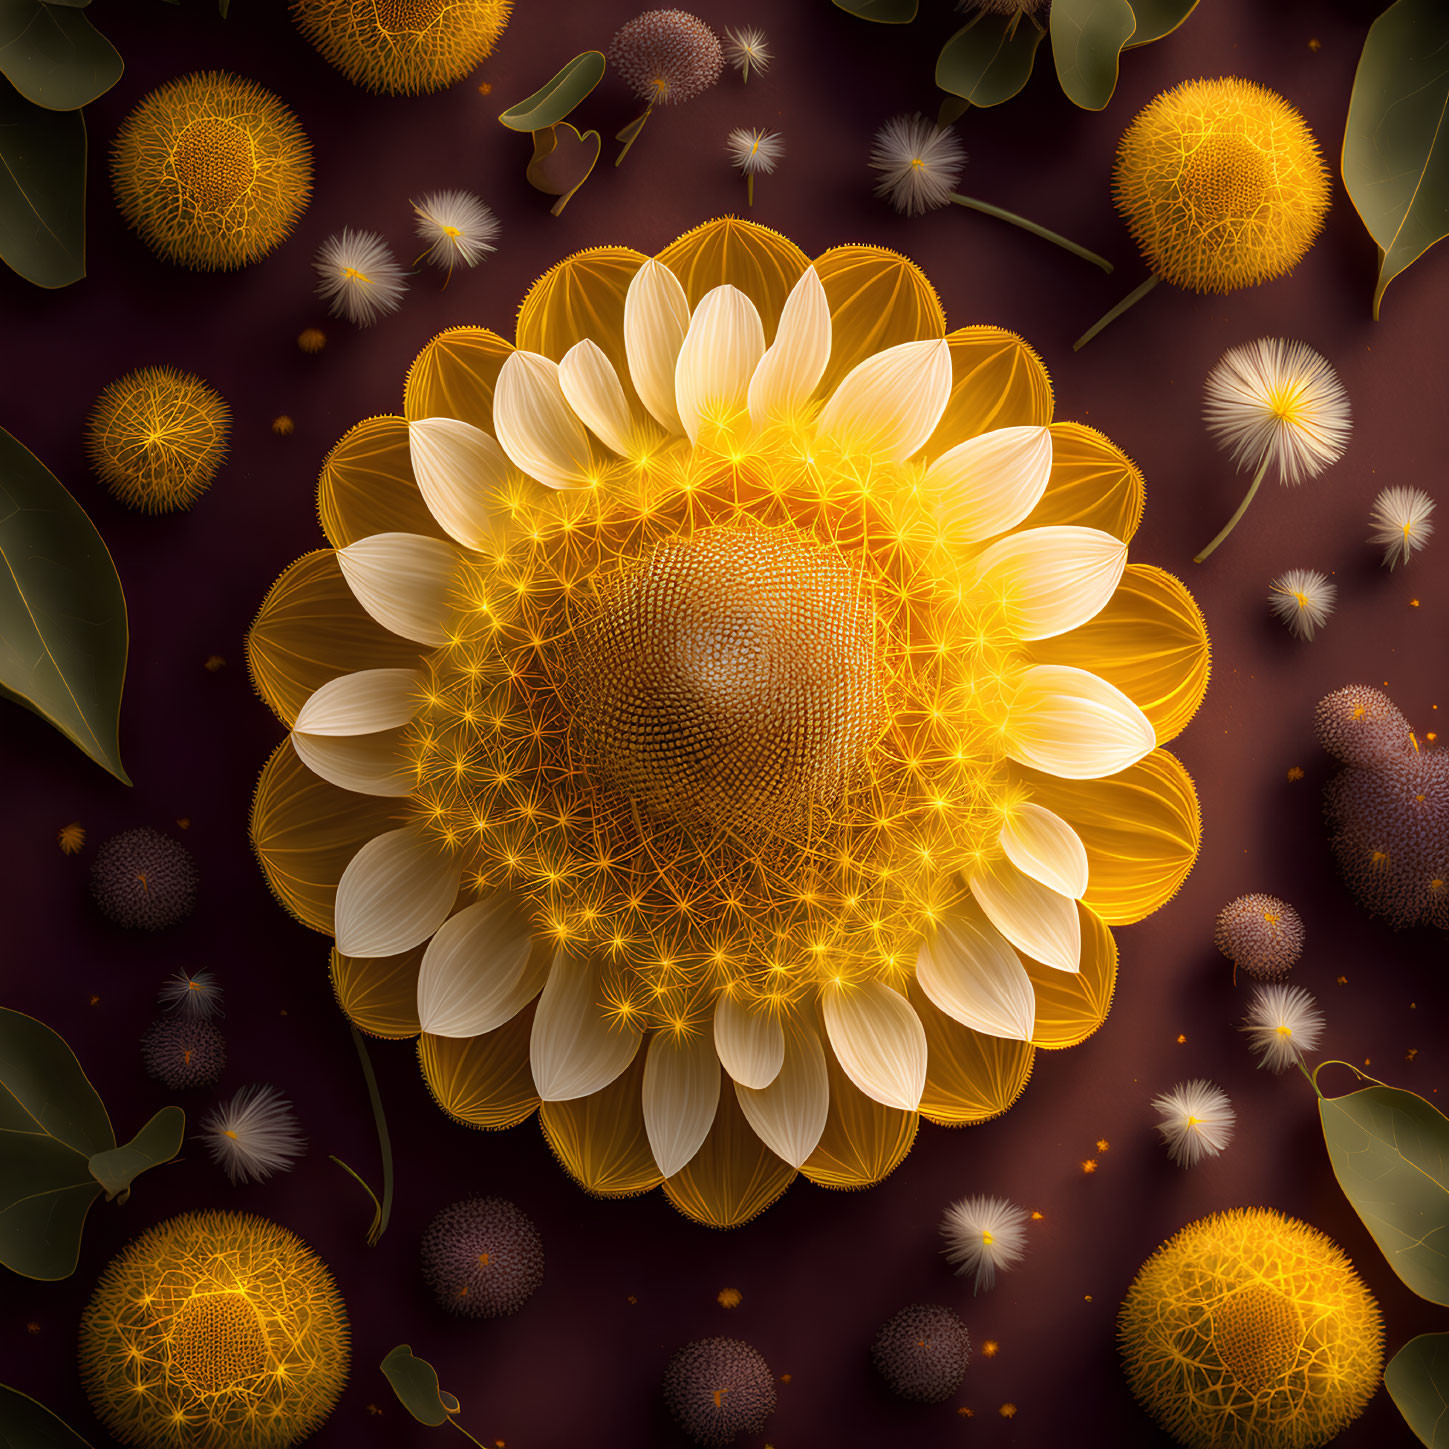 Digitally Enhanced Sunflower with Golden Accents and Dandelion Seeds on Maroon Background